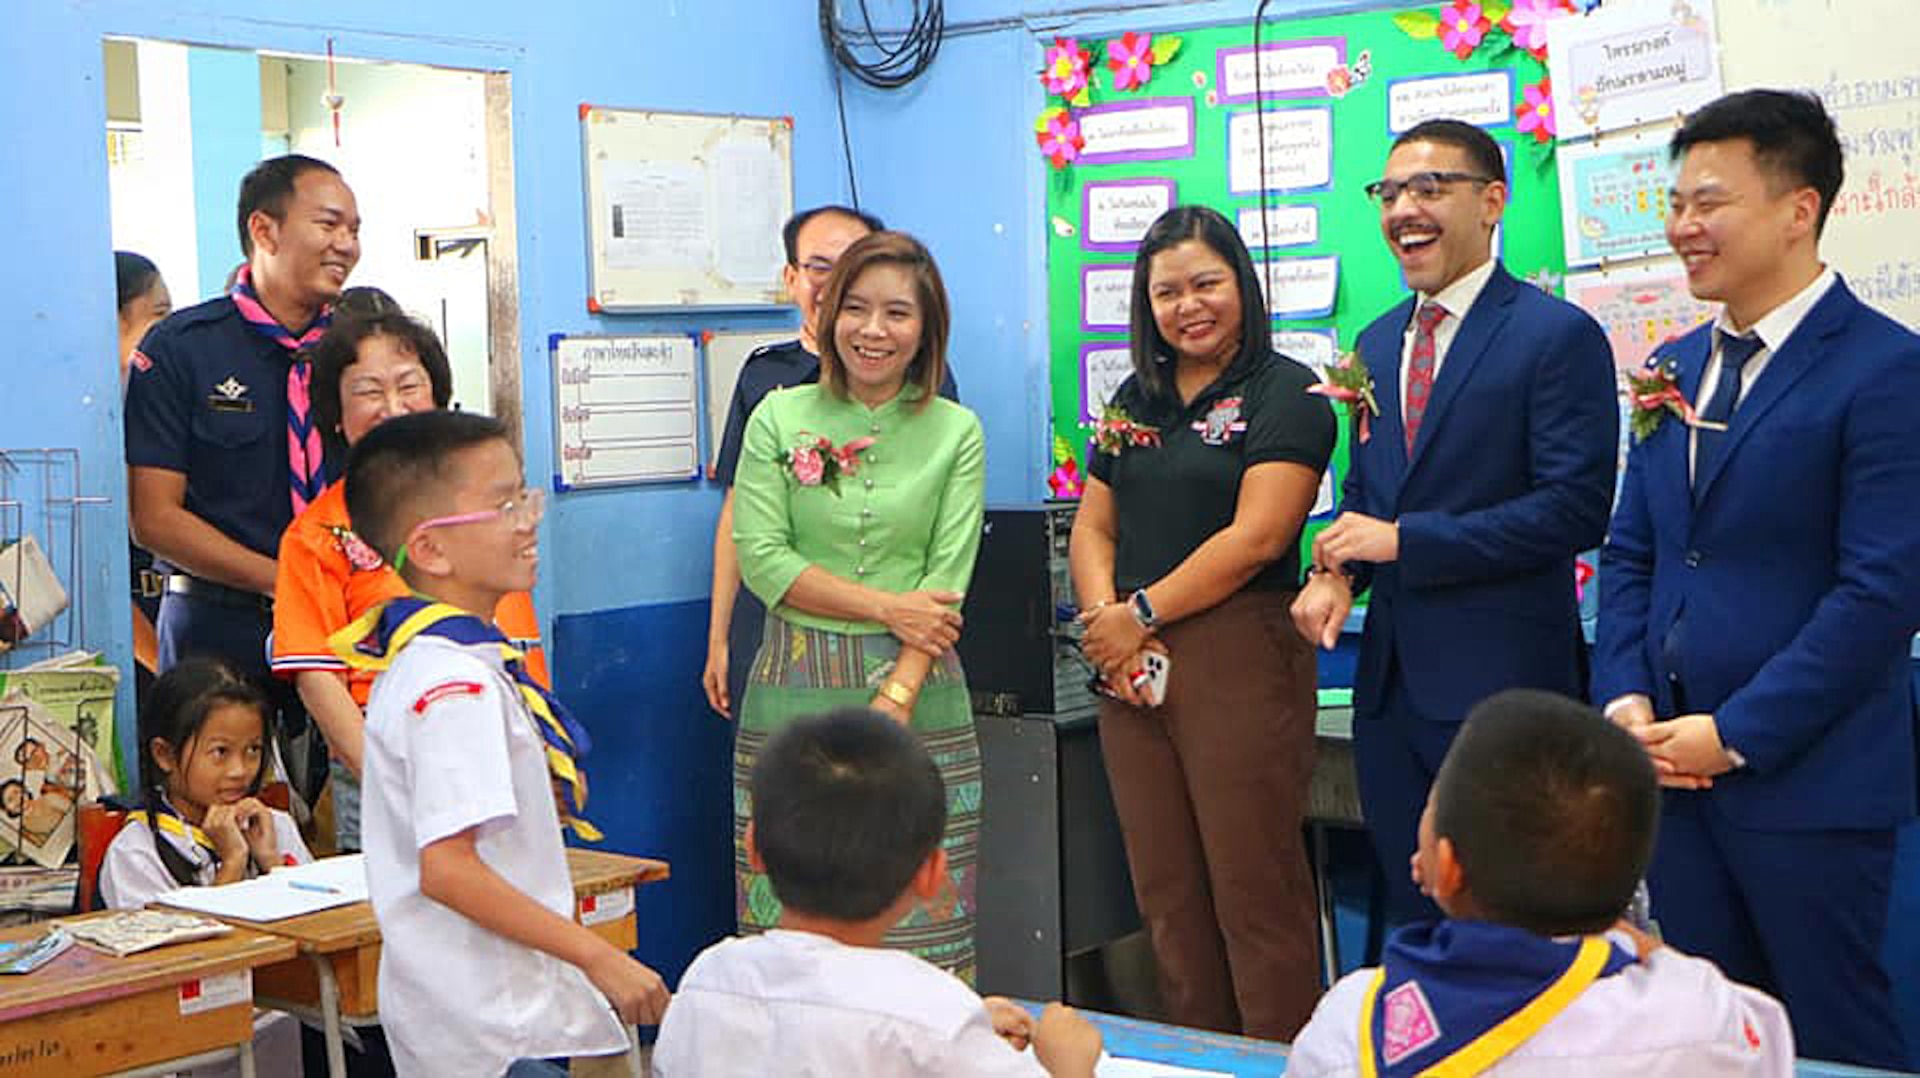 A student at Wat Suan Dok School, Chiang Mai Province, Thailand, showcases his English proficiency skills by talking with members of the U.S. Special Operations Command Pacific Civil Affairs Team-Thailand, right, along with Mrs. Hathairat Chansri, deputy director of Chiang Mai Primary Educational Service Area Office 1, during a donation ceremony Nov. 29, 2023. The donation project coordinated by the Civil Affairs team is dedicated to supplying essential school materials to include desktop computers to support the Ministry of Education’s initiative to enhance distance learning in school. “Thank you for focusing on our children and youth,” said Chansri. “The media, materials, and educational equipment provided opens them up the world of learning.” U.S. Civil Affairs teams partner with communities around the world to increase stability, enable local governments, and improve quality of life for civilians.